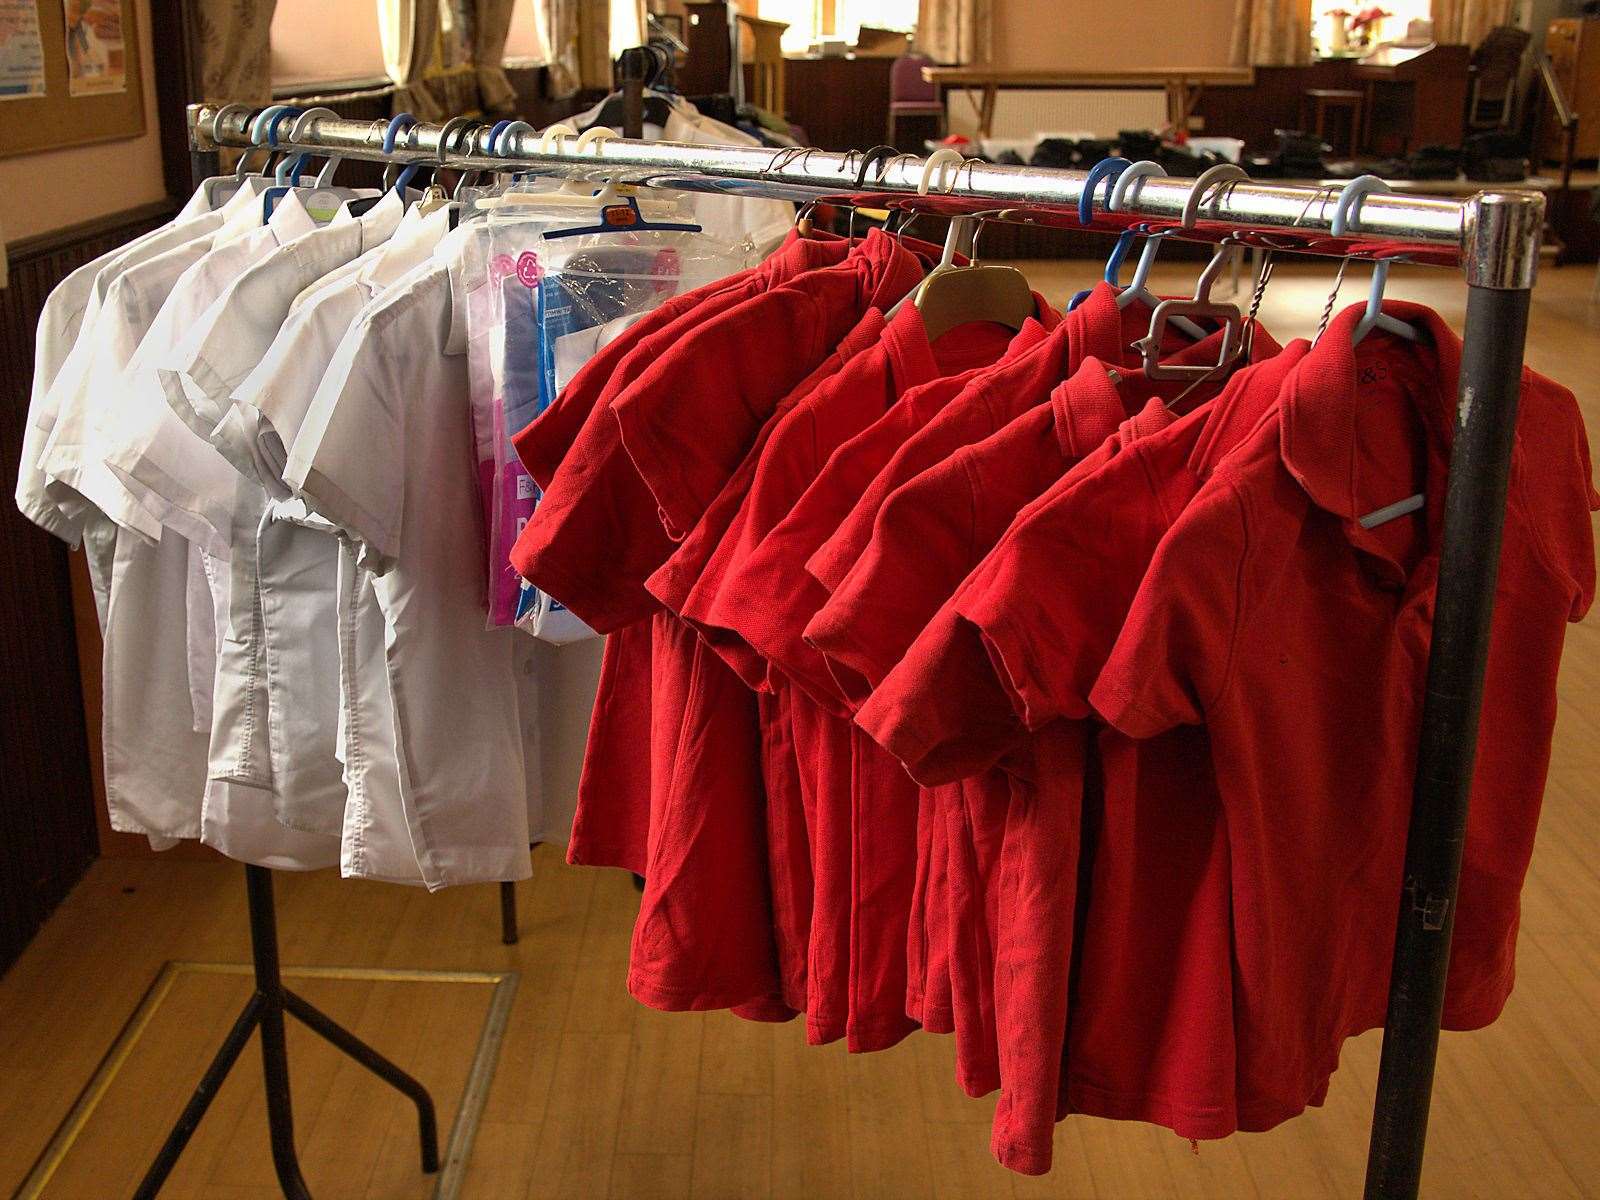 St John's have a wide variety of uniforms available.